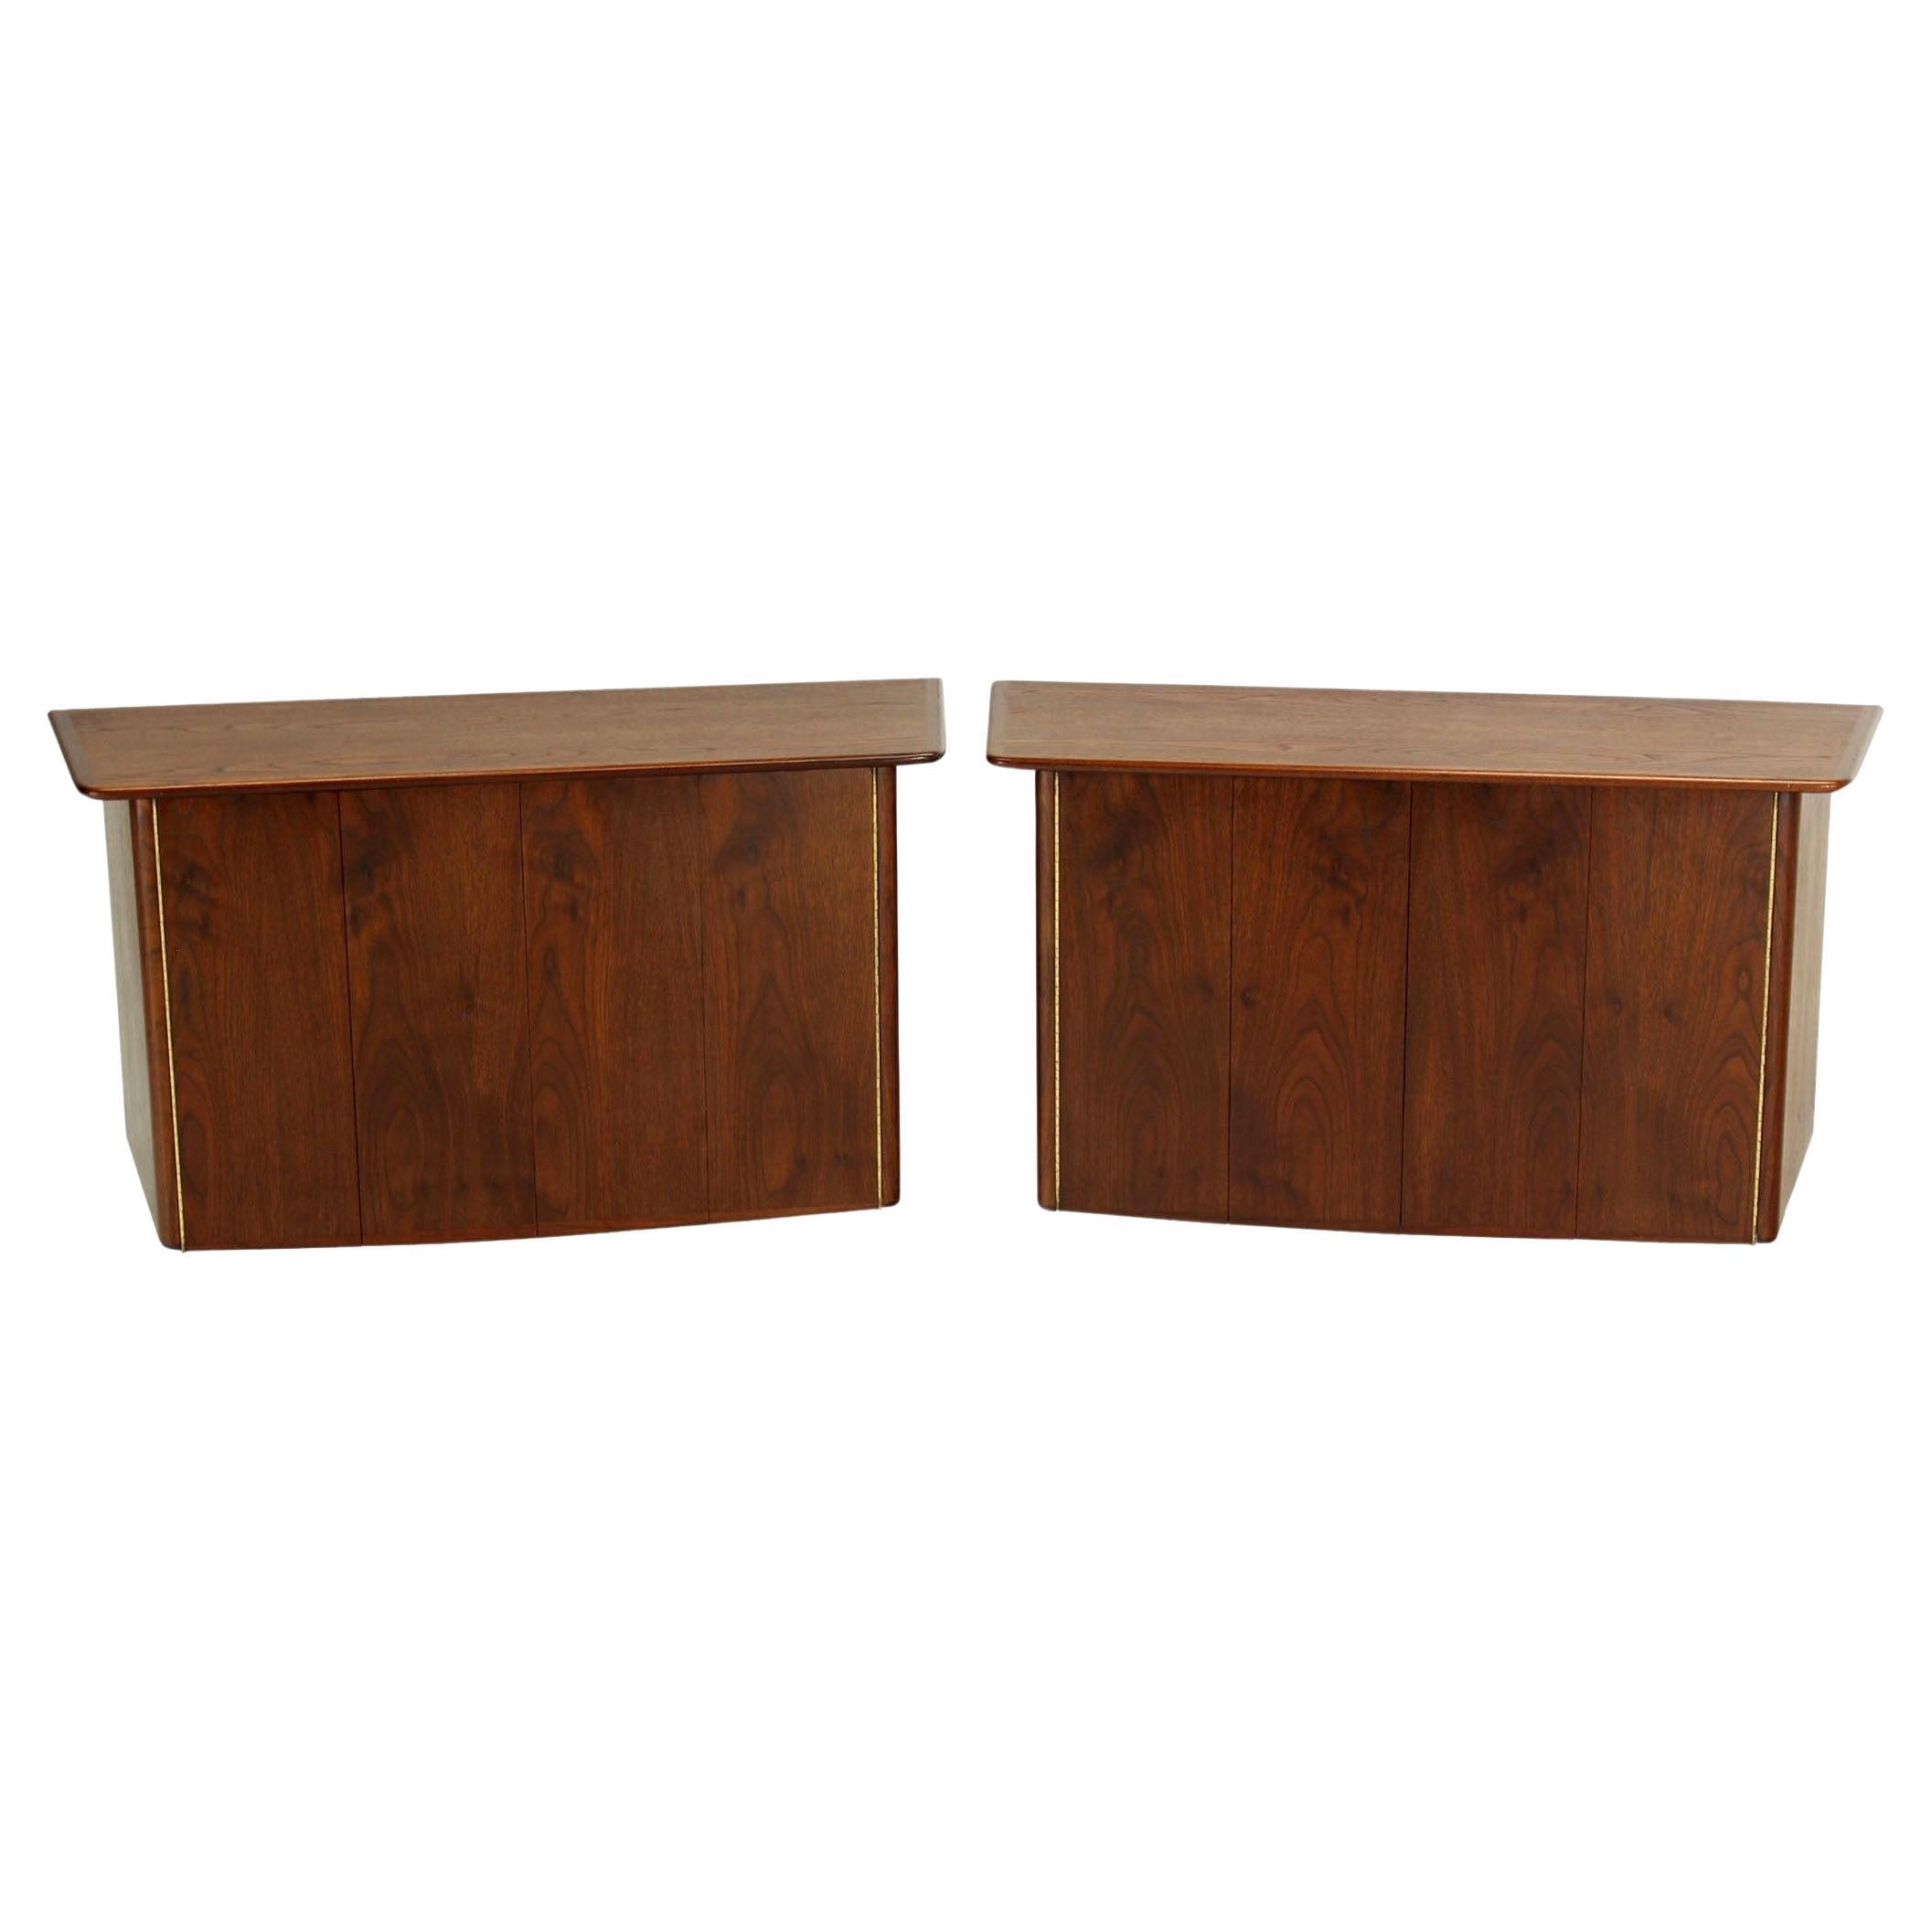 Pair HANGING Walnut Mid-Century Danish Modern Floating Dressers Console Cabinets For Sale